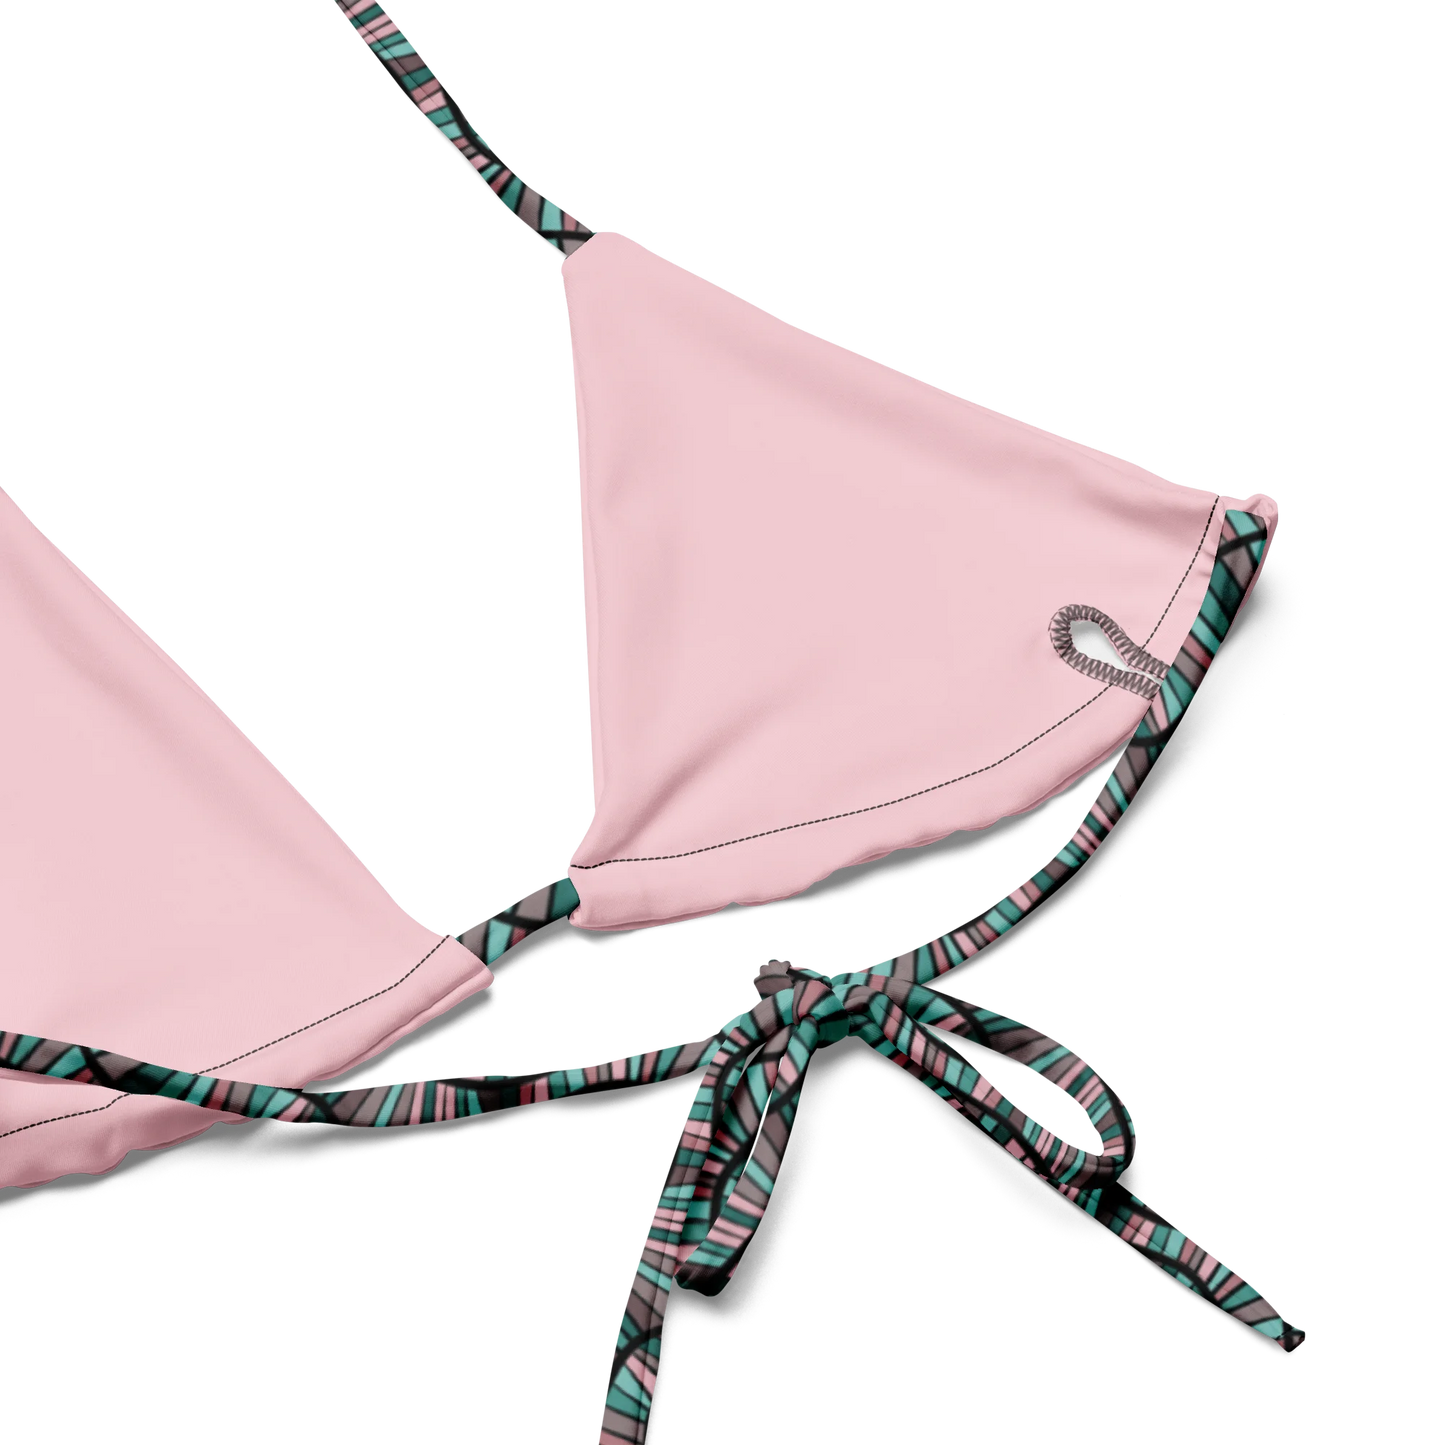 Gren'n'rose Artistic Abstractions Recycled Bikini